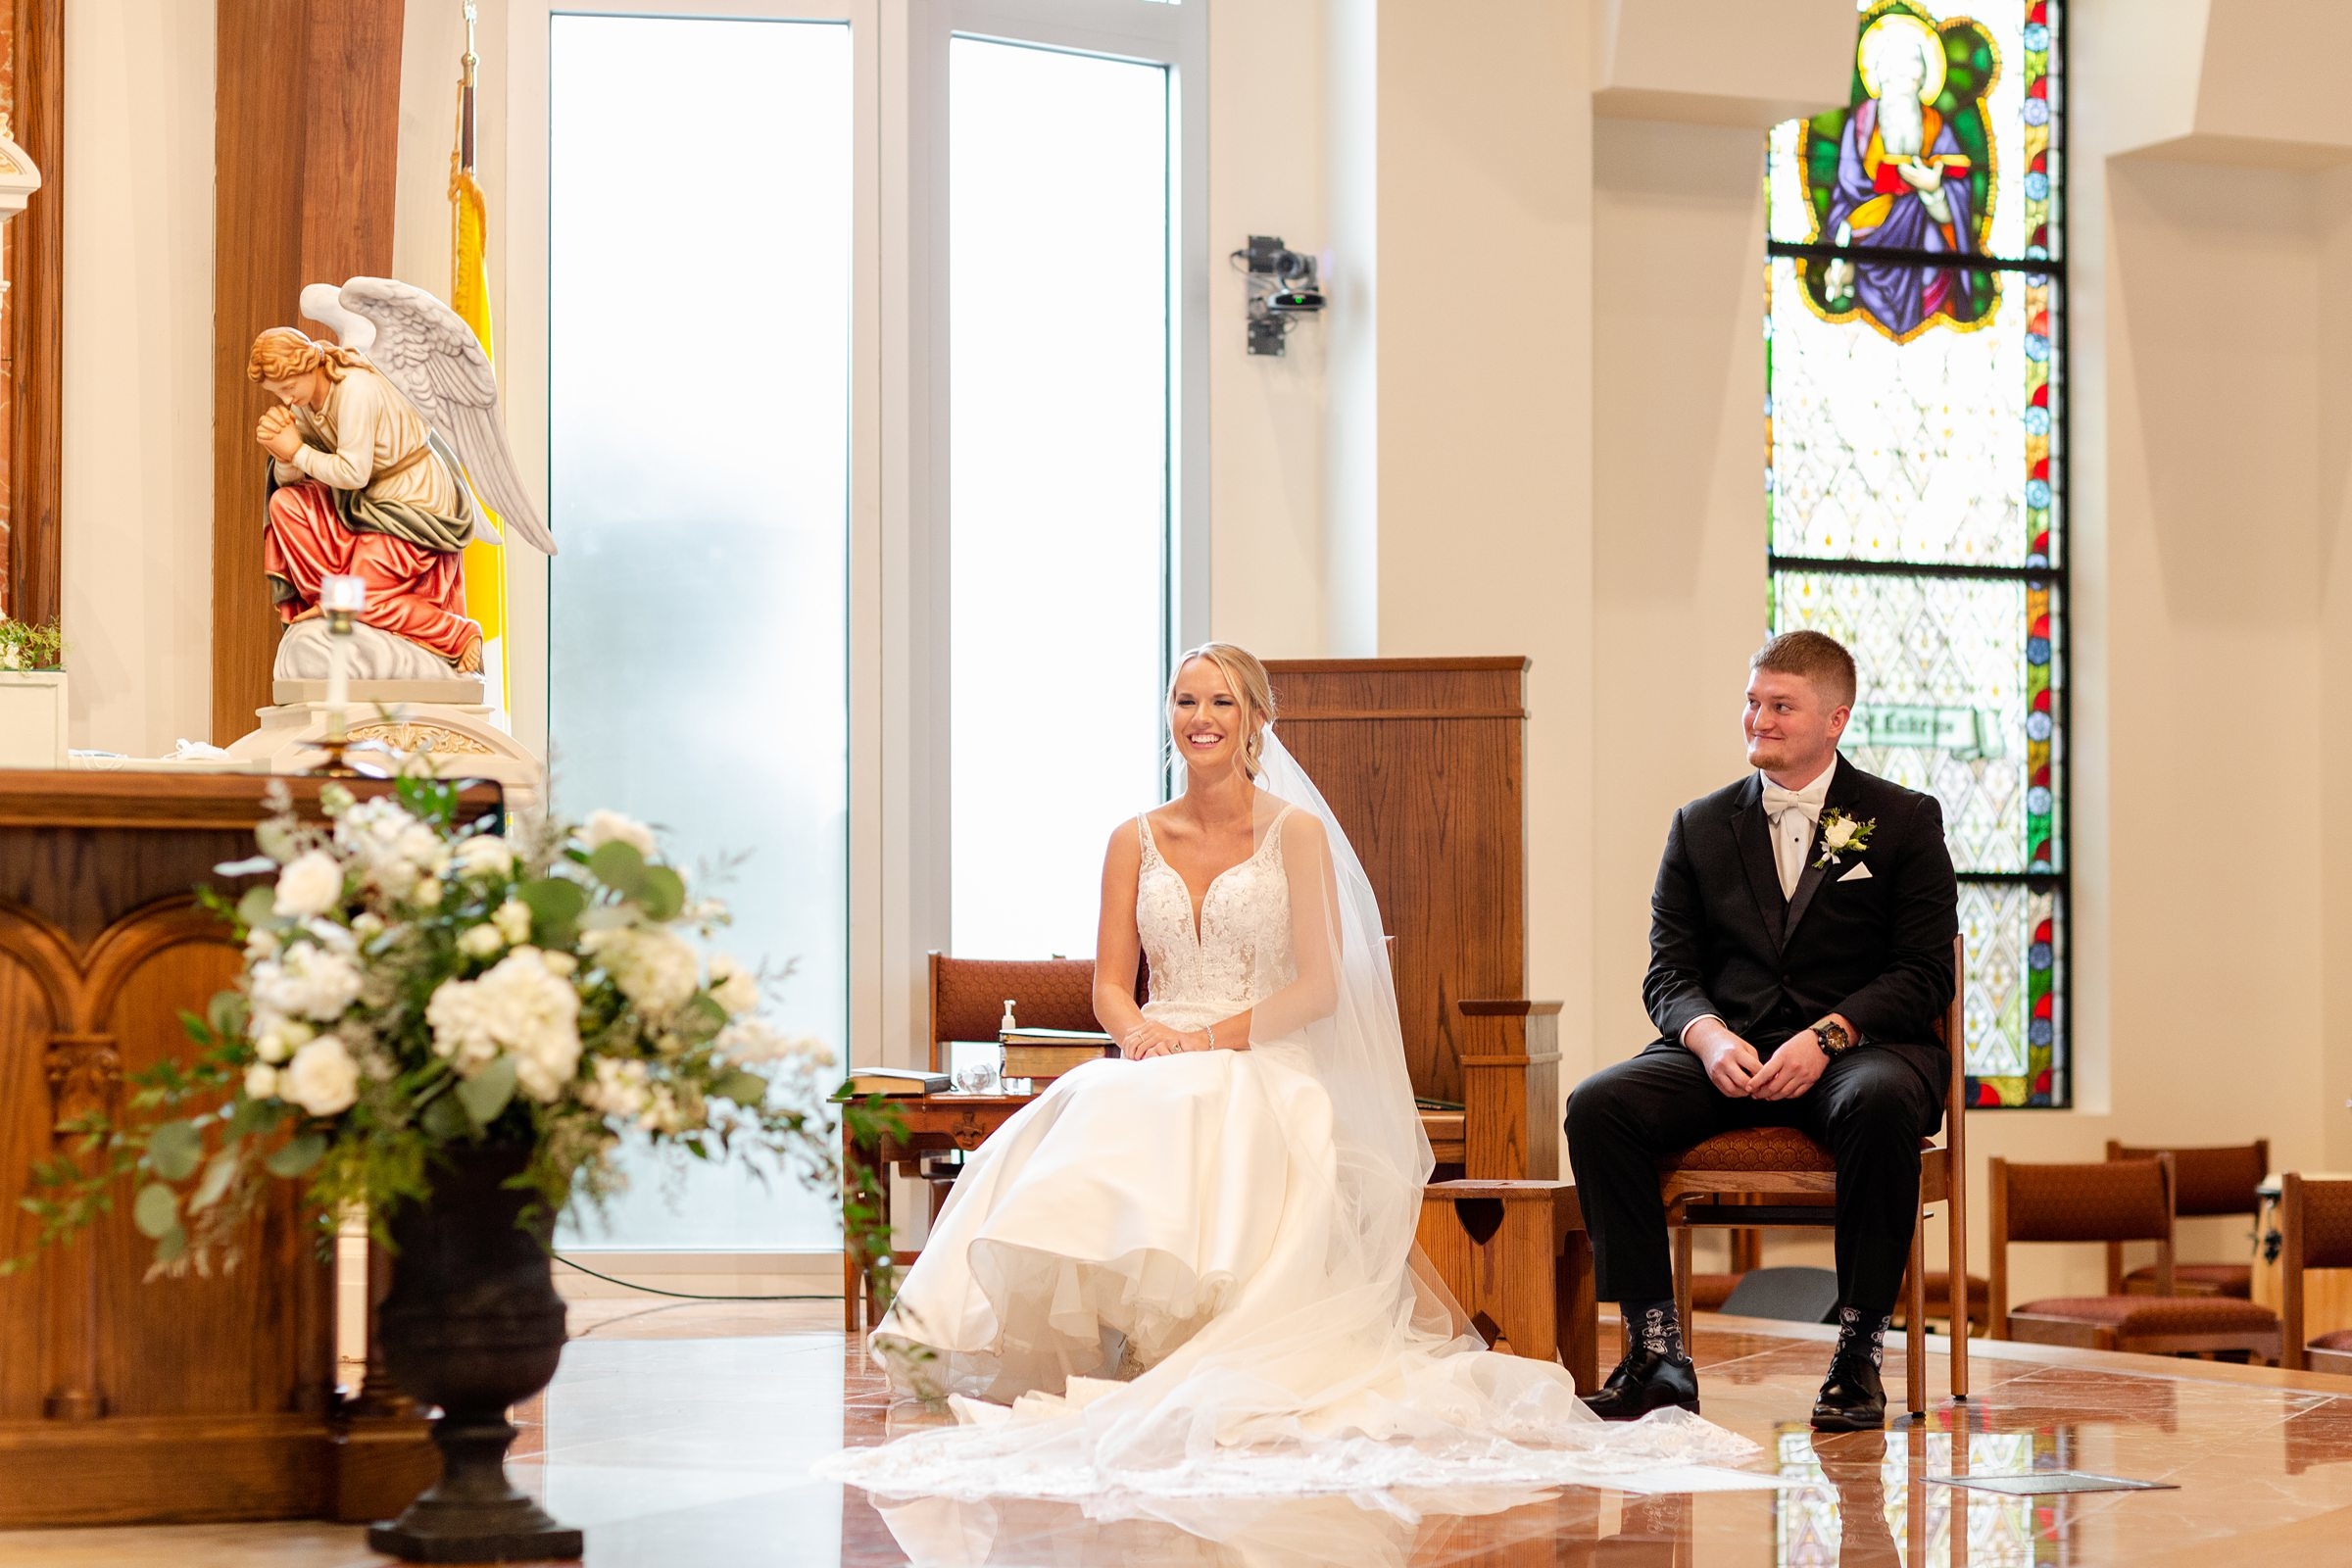 Hannah and Cody's Wedding in Booneville, IN143.jpg